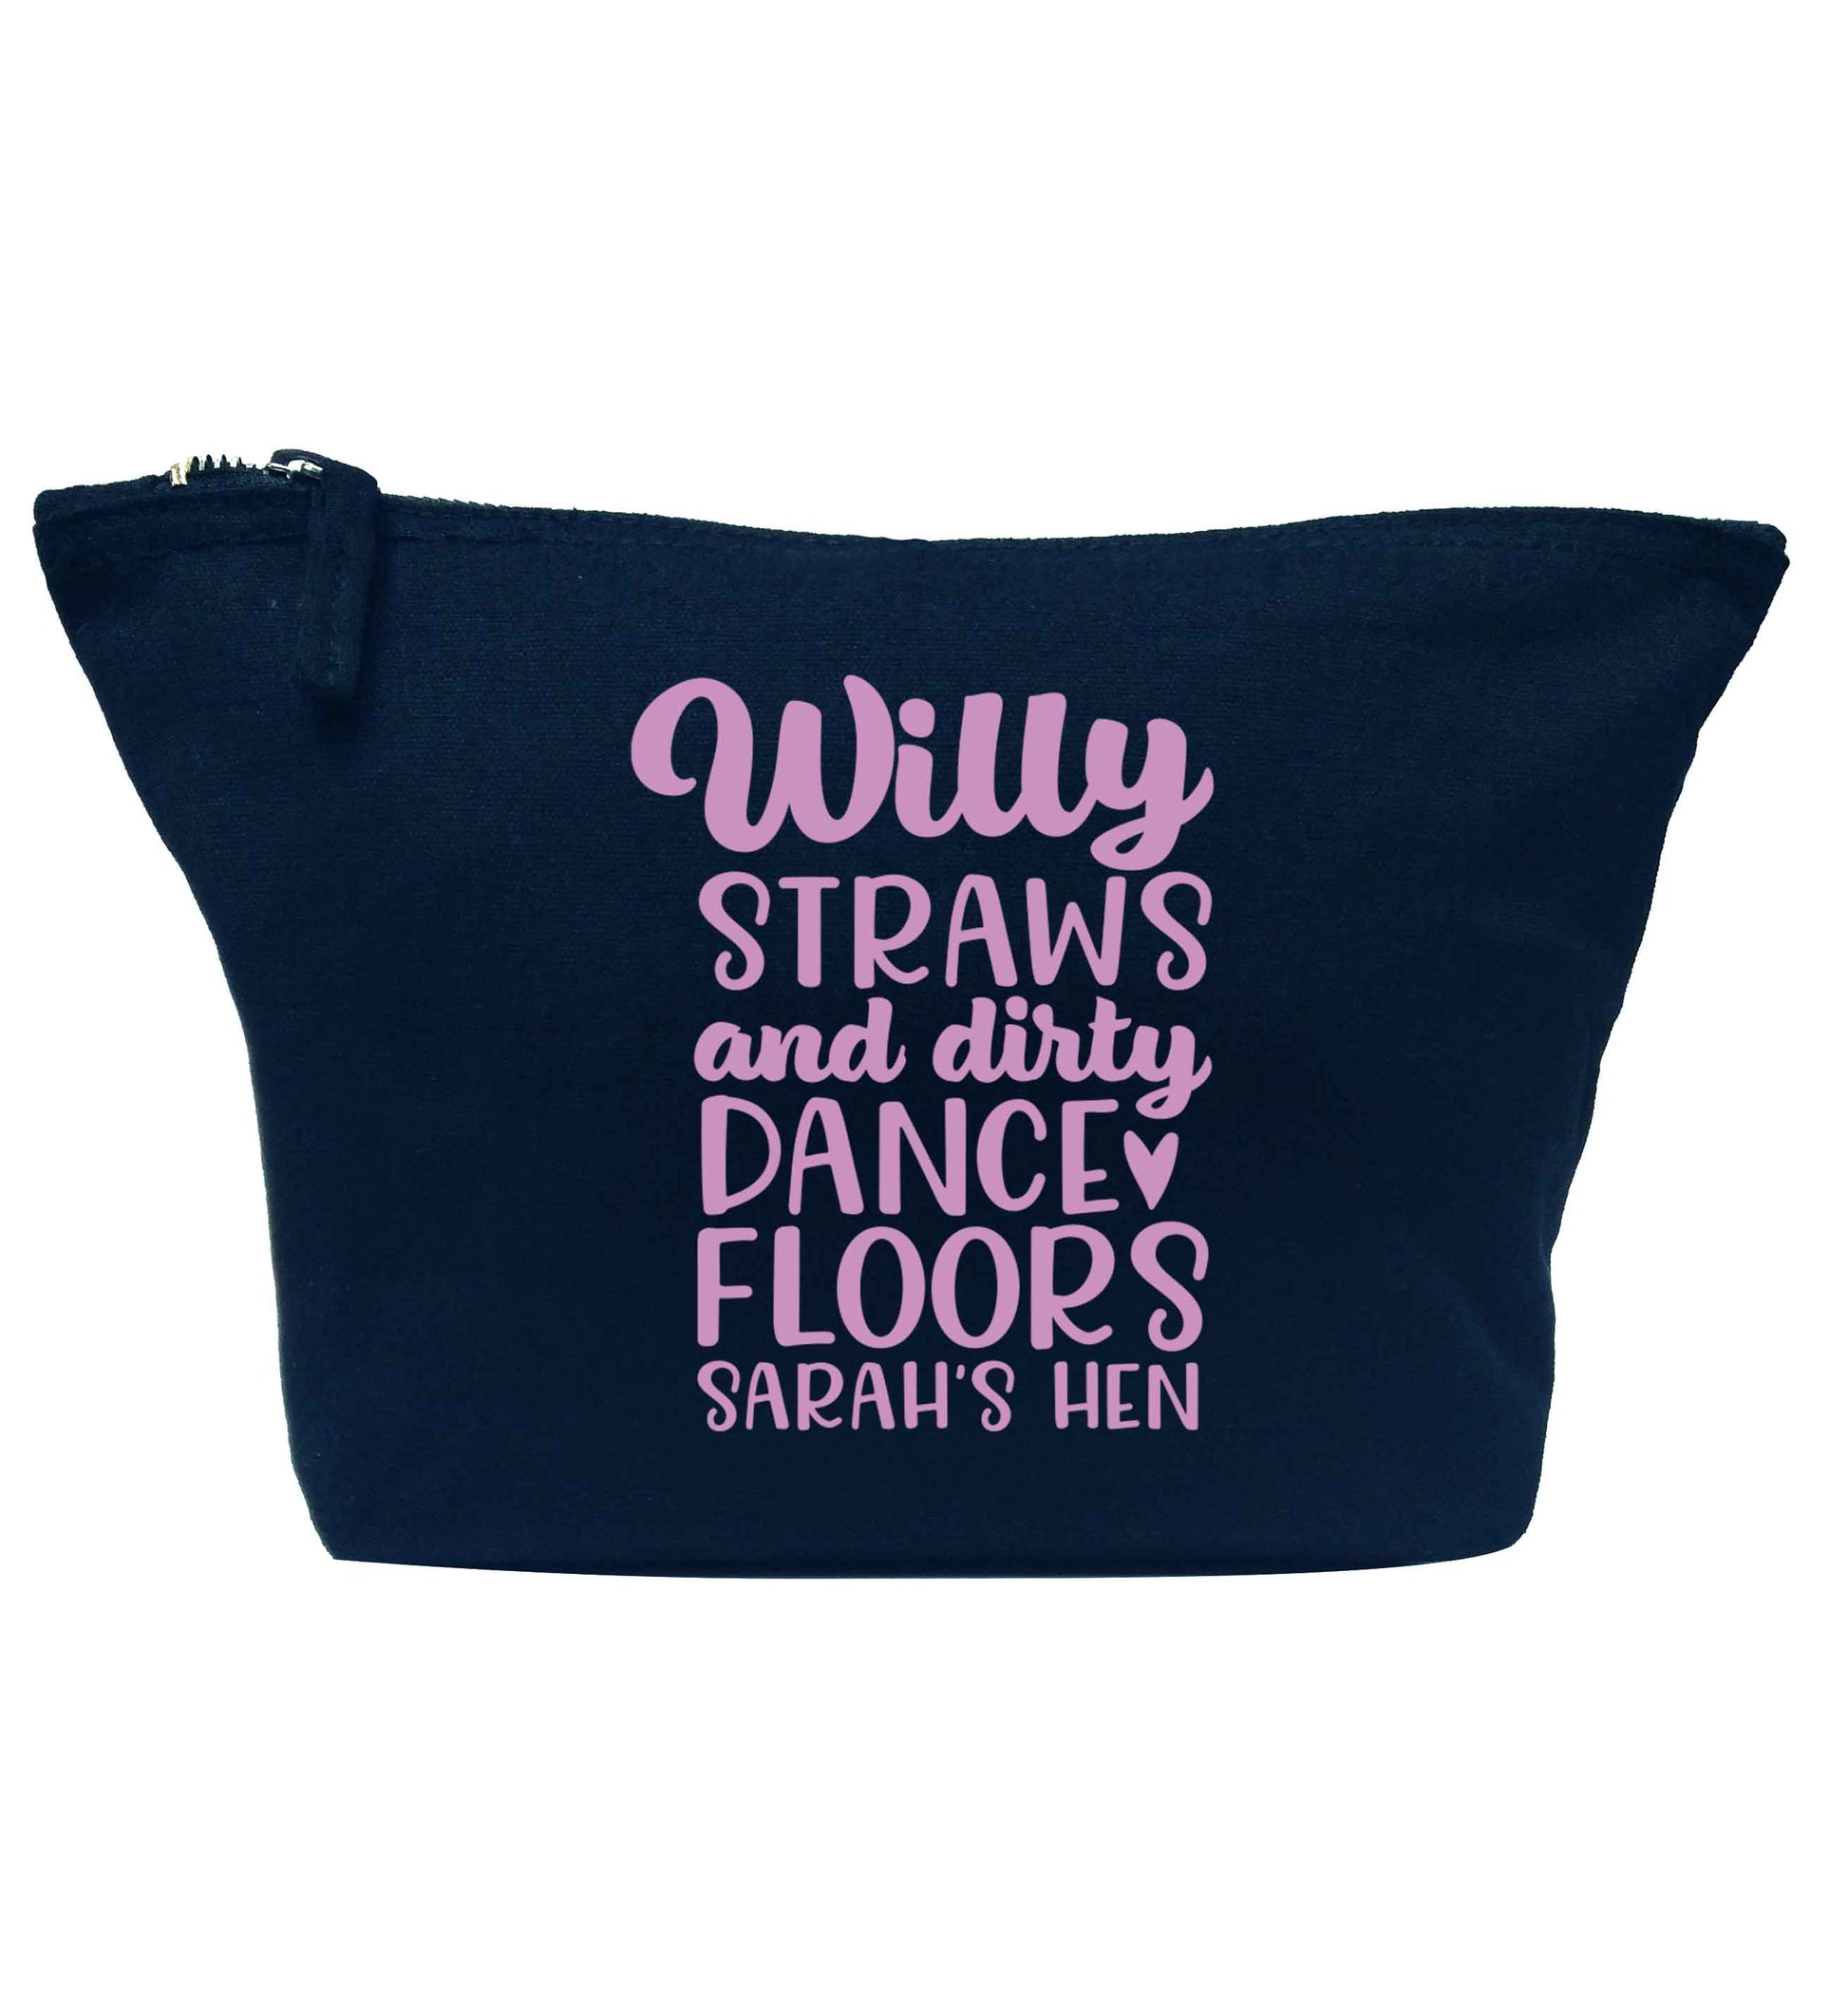 Willy straws and dirty dance floors navy makeup bag